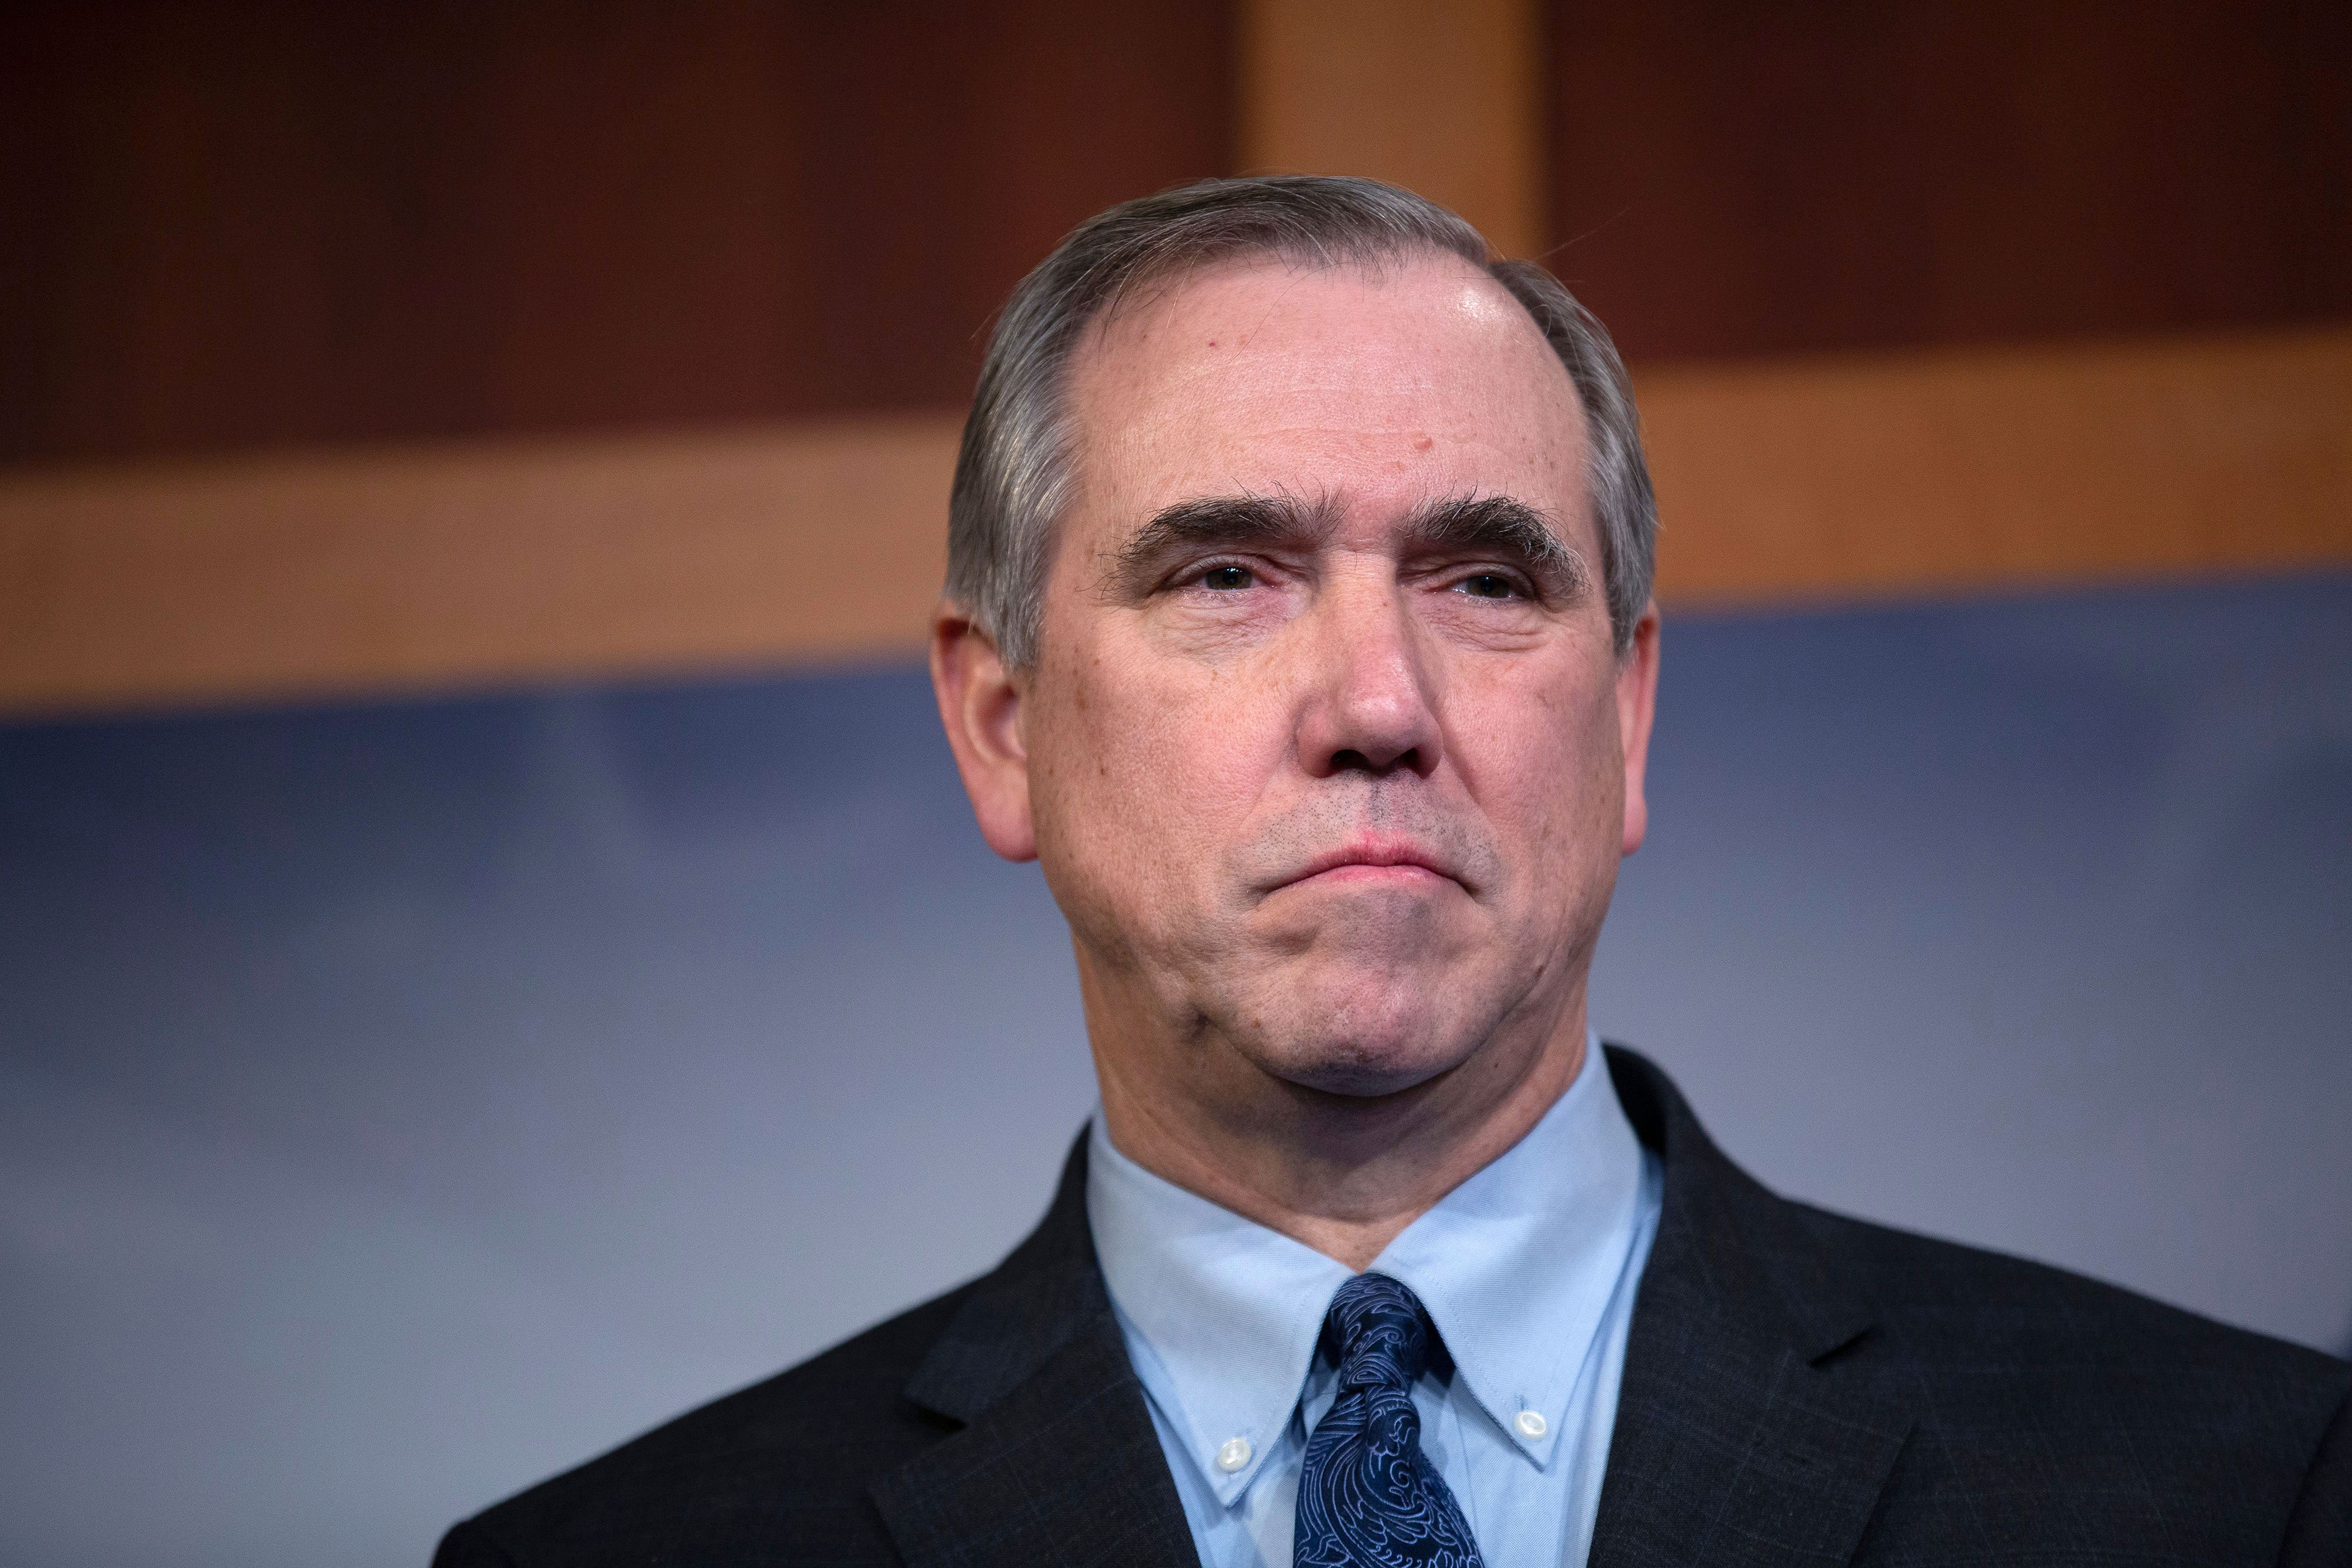 Sen. Jeff Merkley attends a press conference at the Capitol on January 25, 2020.